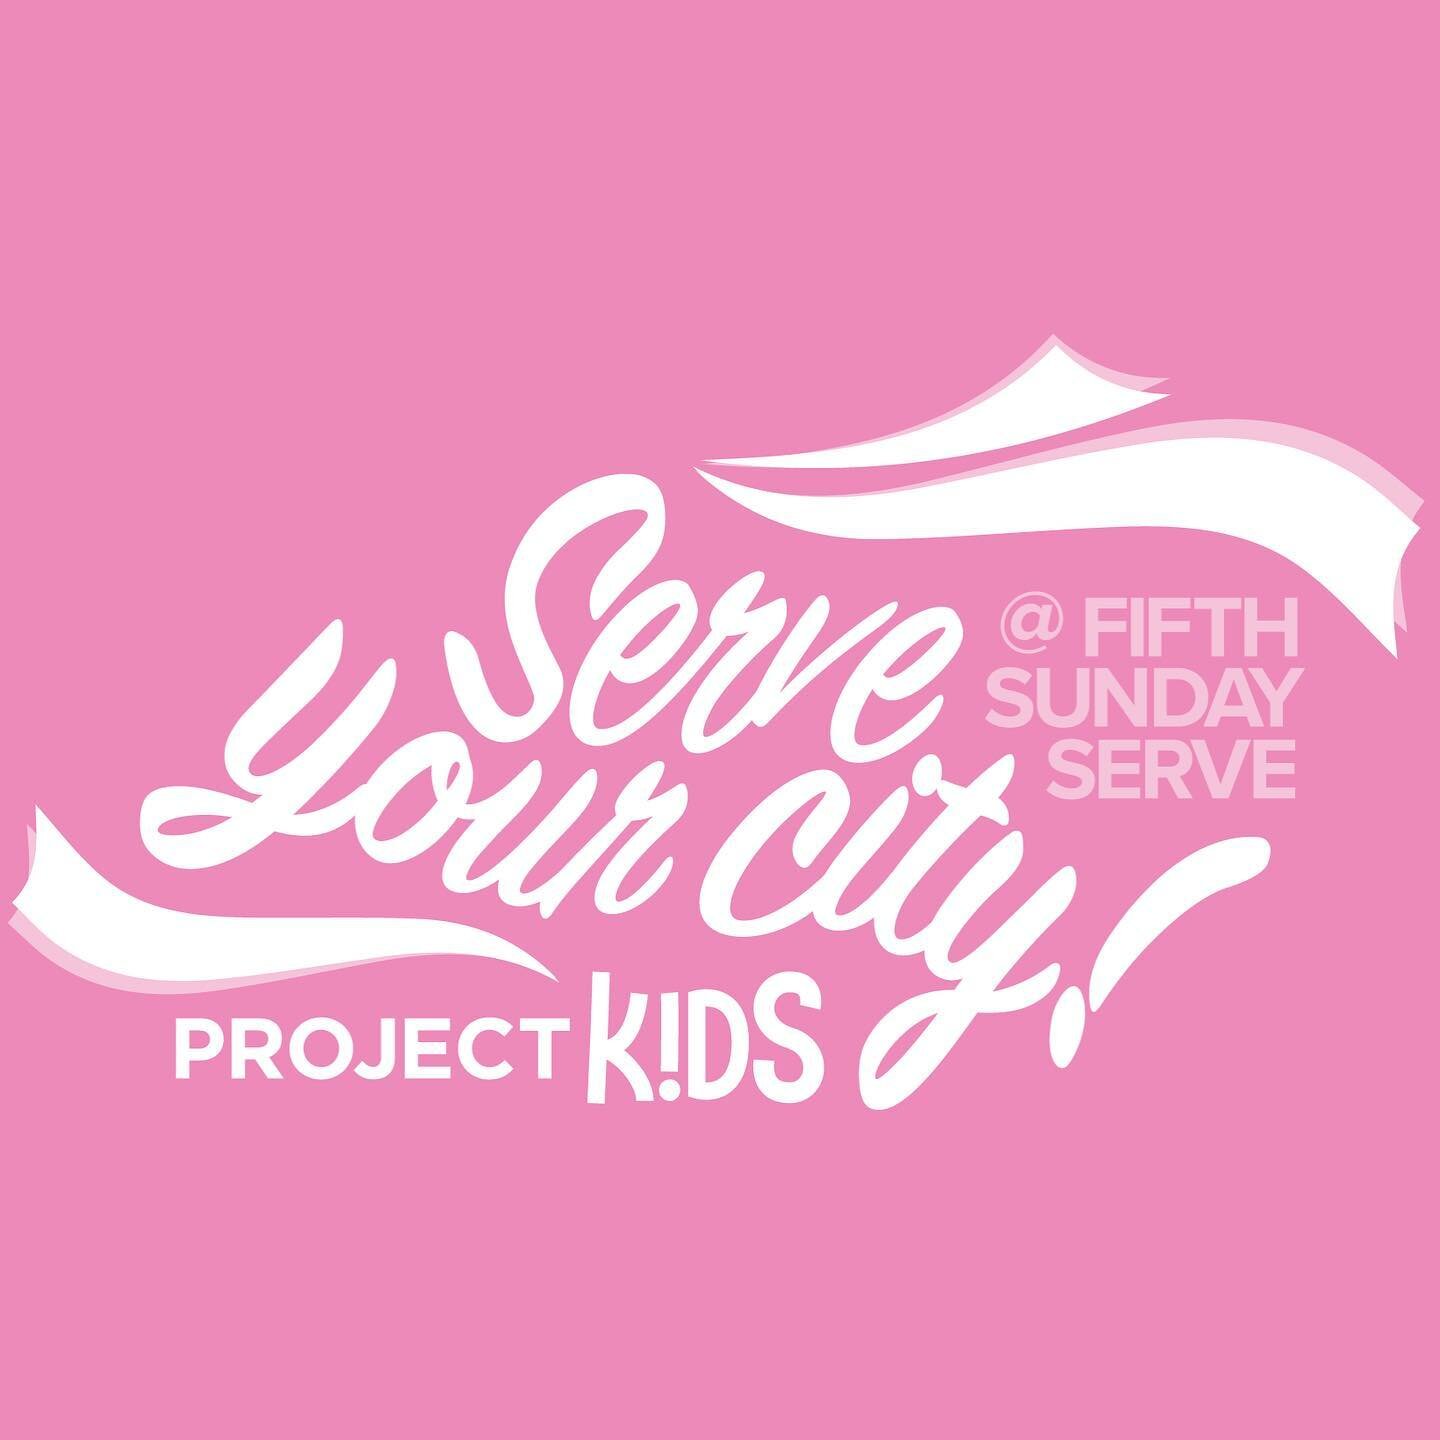 Fifth Sunday Serve is happening THIS SUNDAY! This is an opportunity for Project KIDS to get hands-on with Serving Our City! We want kids to learn what it means to serve, and that YES!! They can serve too!!
.
.
Your kids will partner with two of our l